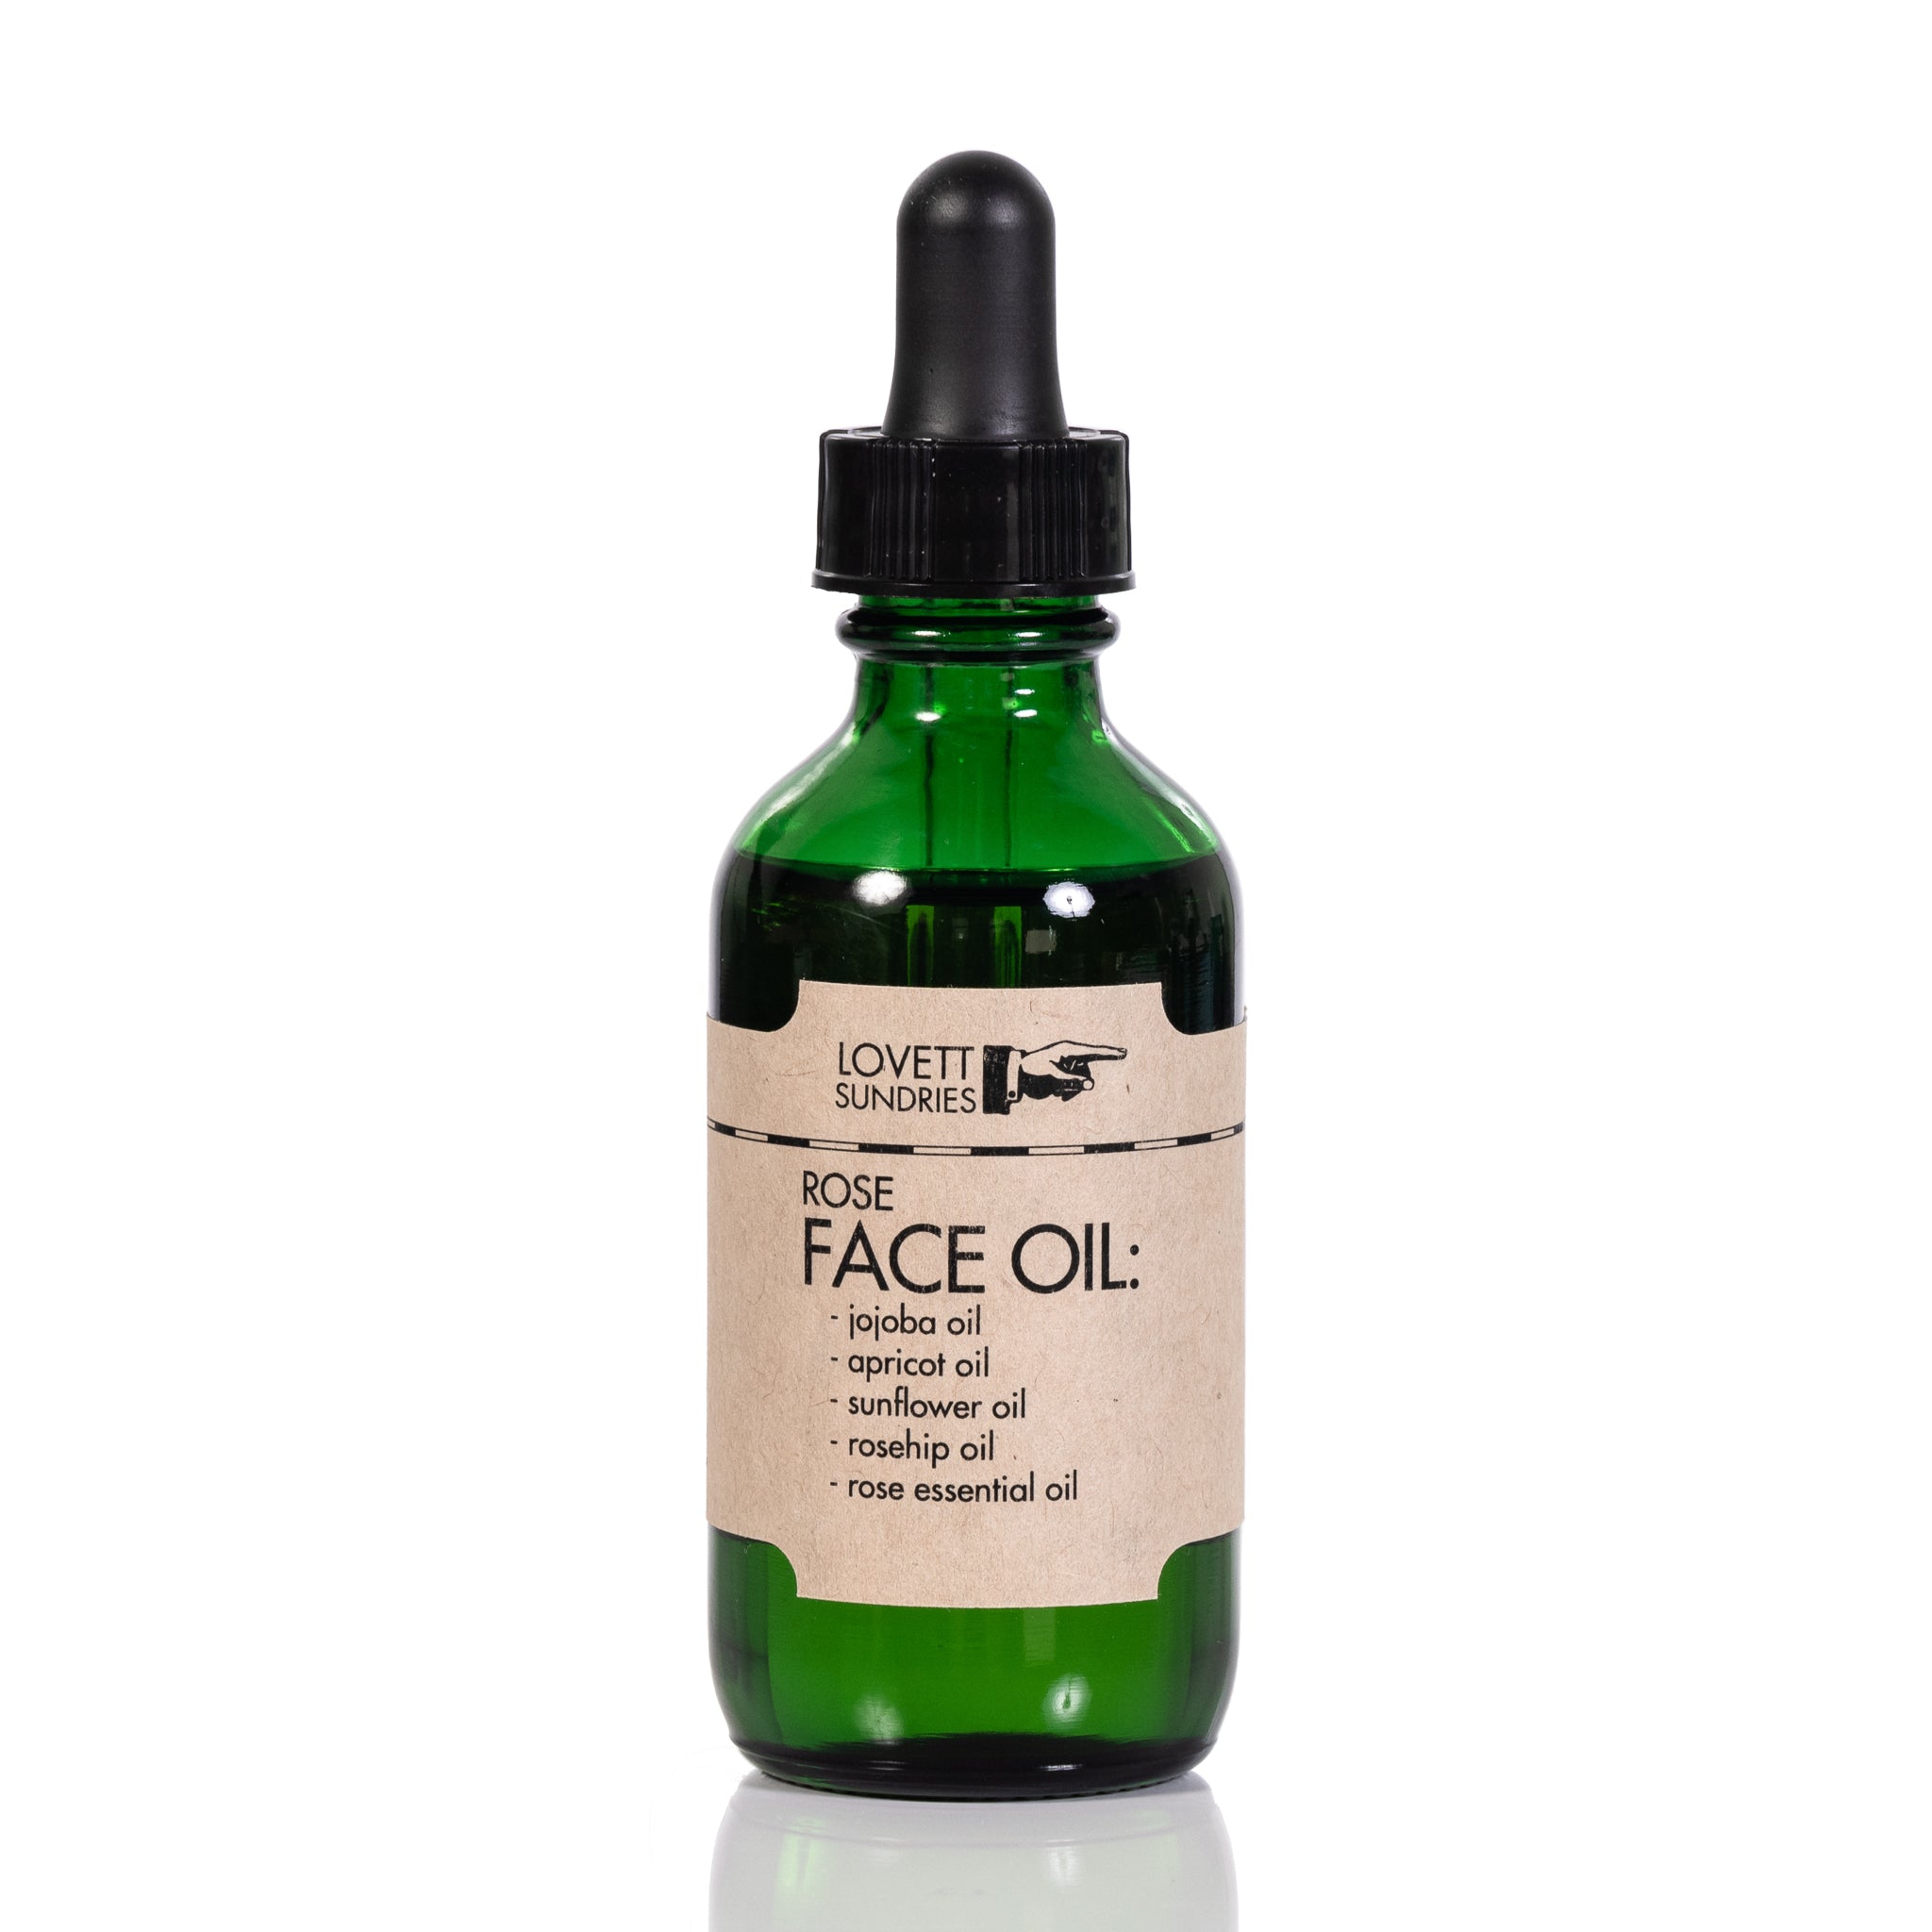 Face Oil in glass bottle with kraft paper label and rubber topped glass vial application dropper.